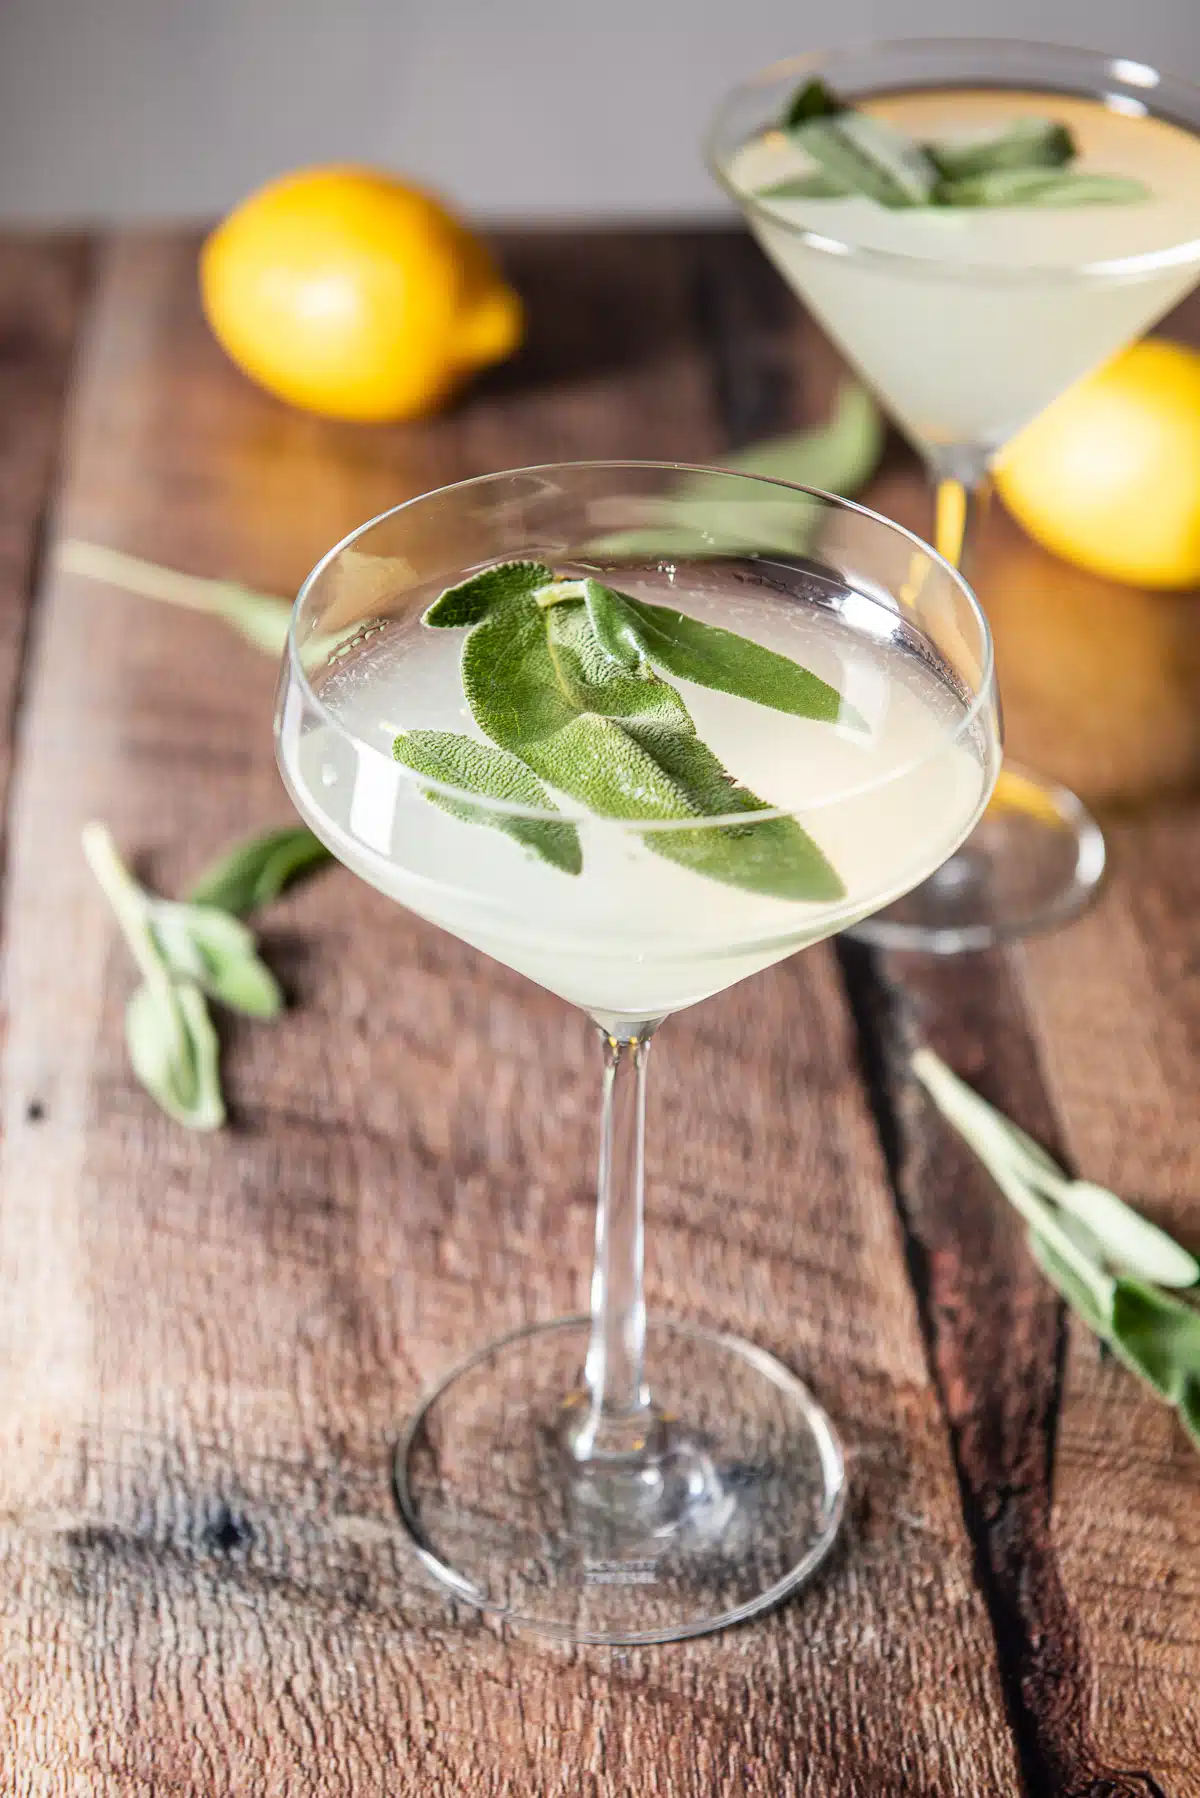 Fun martini glass filled with the martini and sage leaves